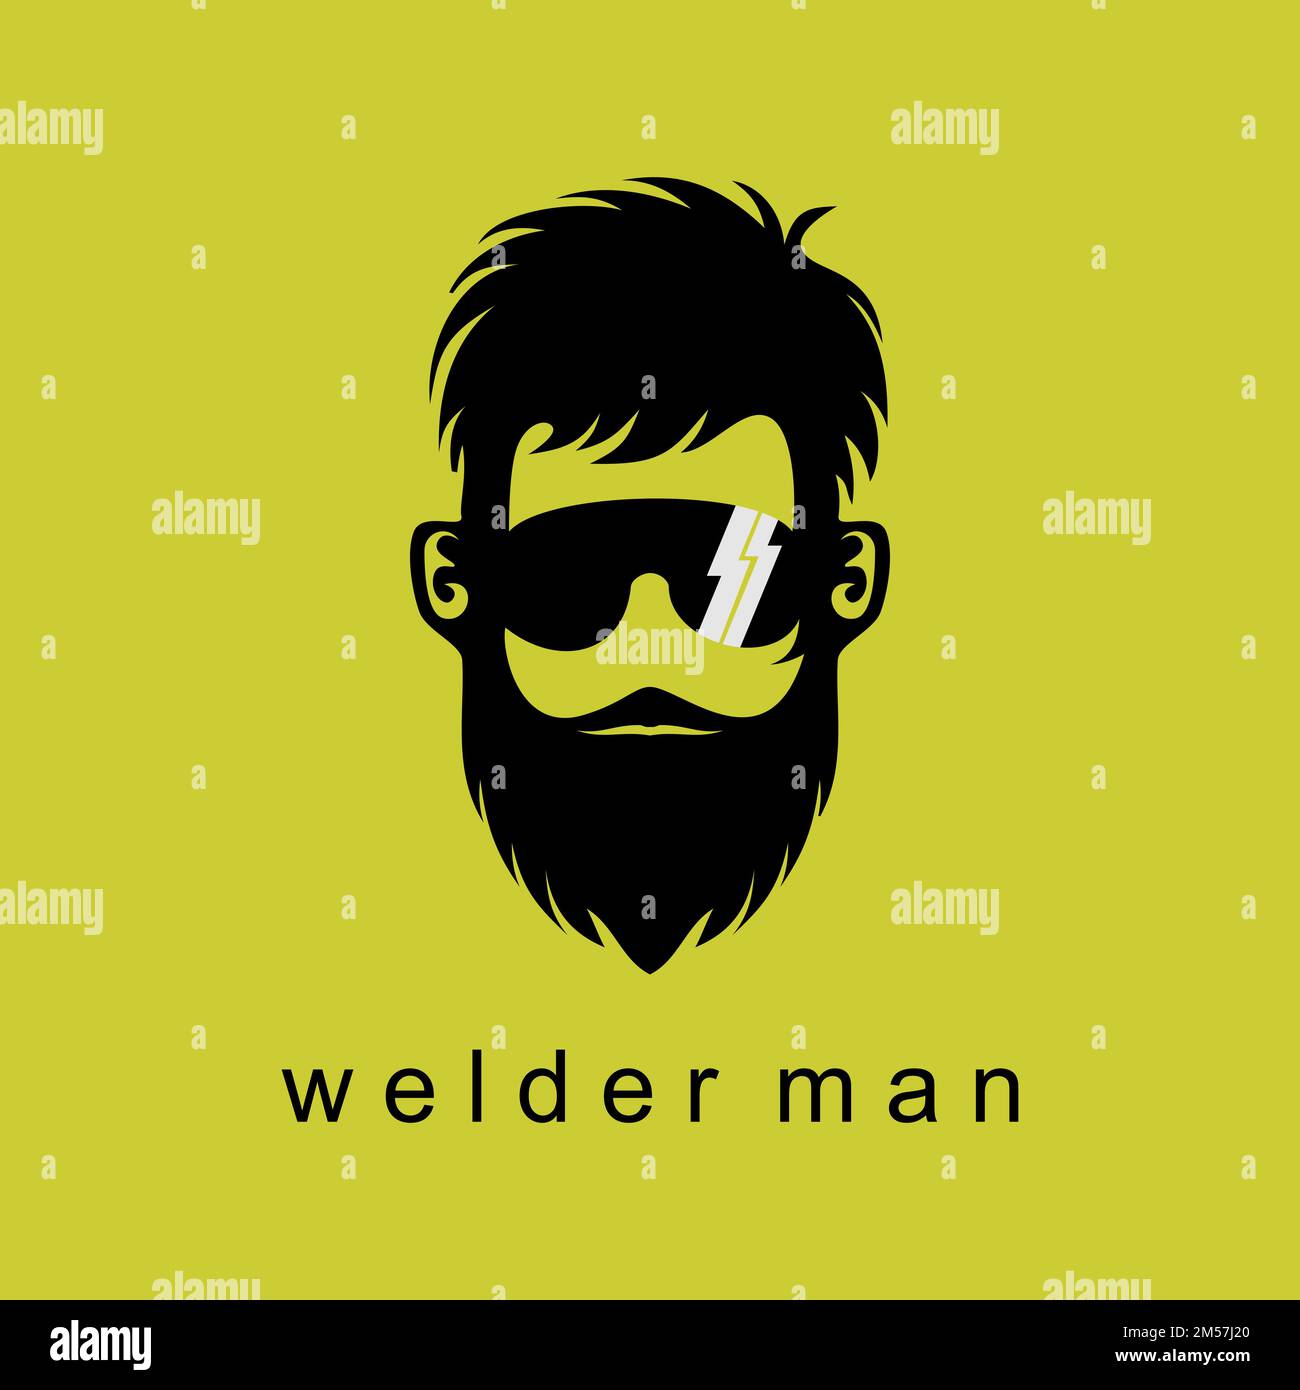 Unique welder man face with eyes glass, mustache and beard image graphic logo design abstract concept vector stock. related to mechanic or character. Stock Vector